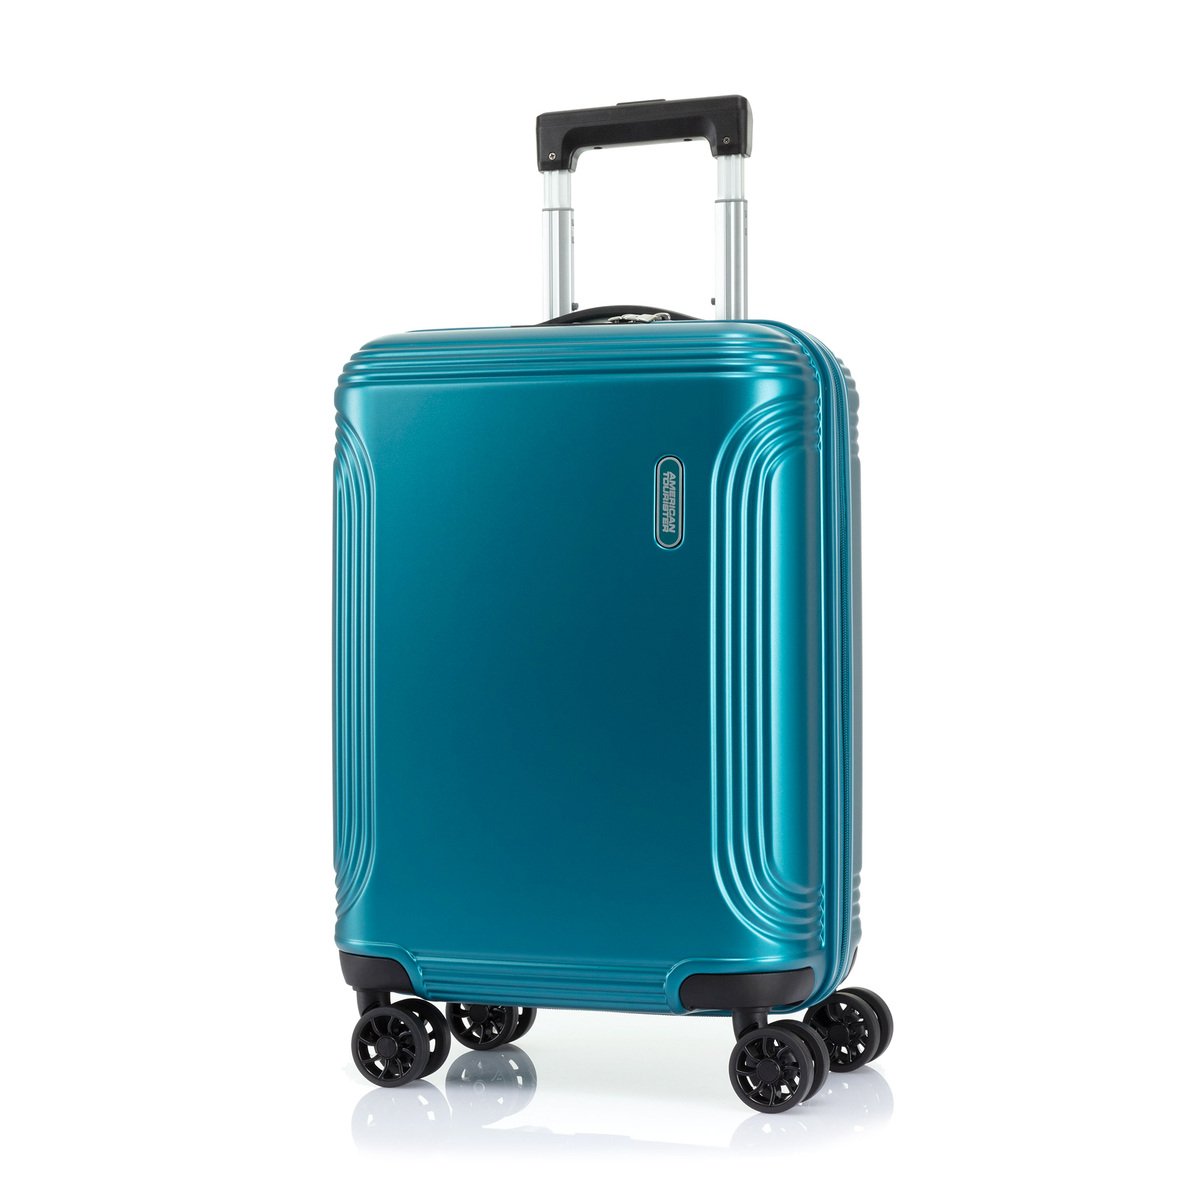 American Tourister Hypebeat Hard Trolley 69cm Teal